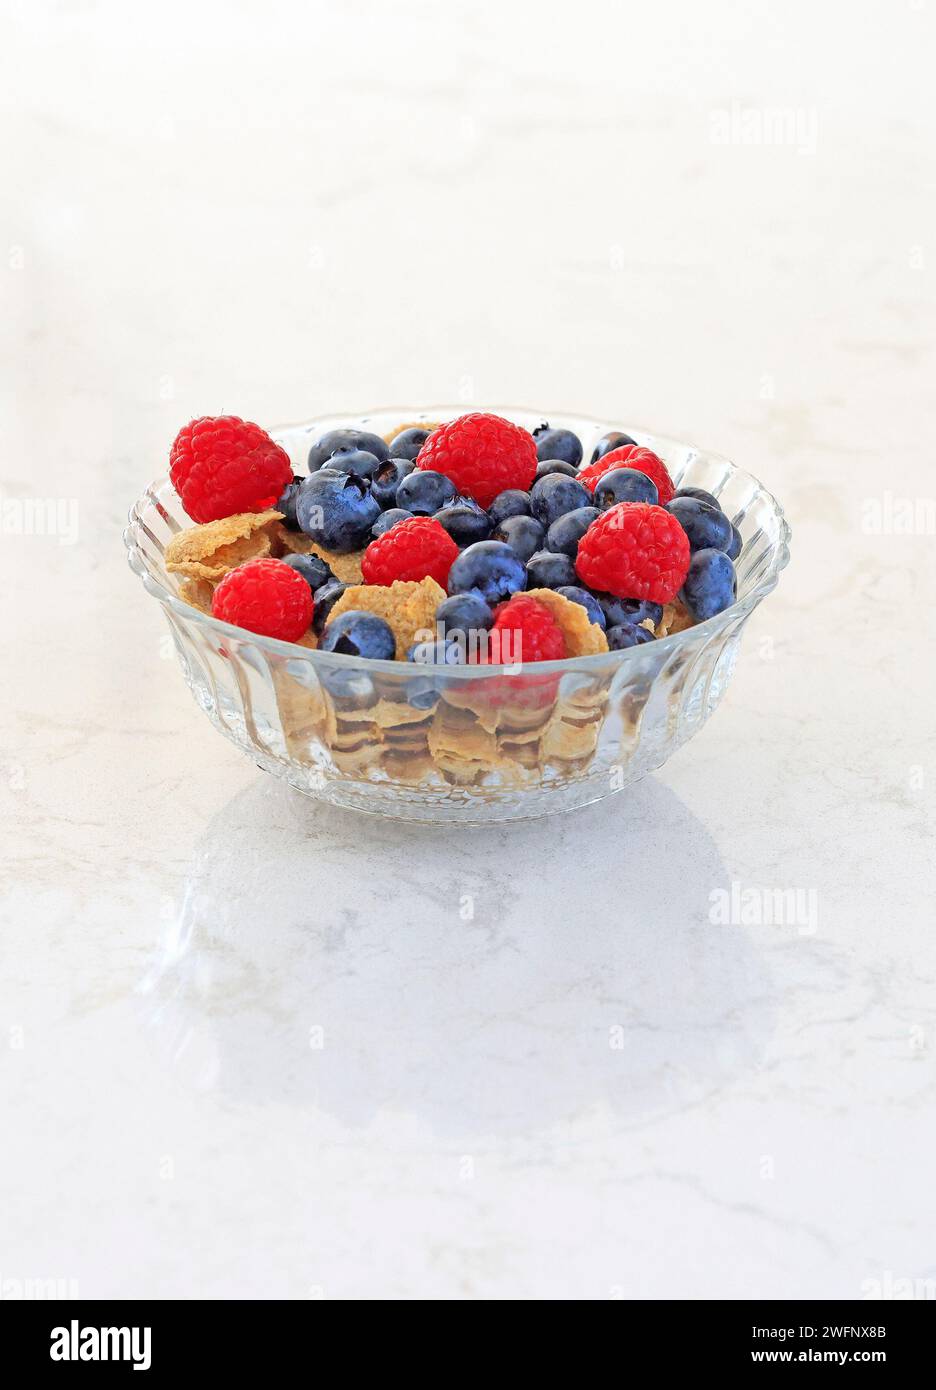 Bowl of oat flakes with blueberries and raspberries Stock Photo